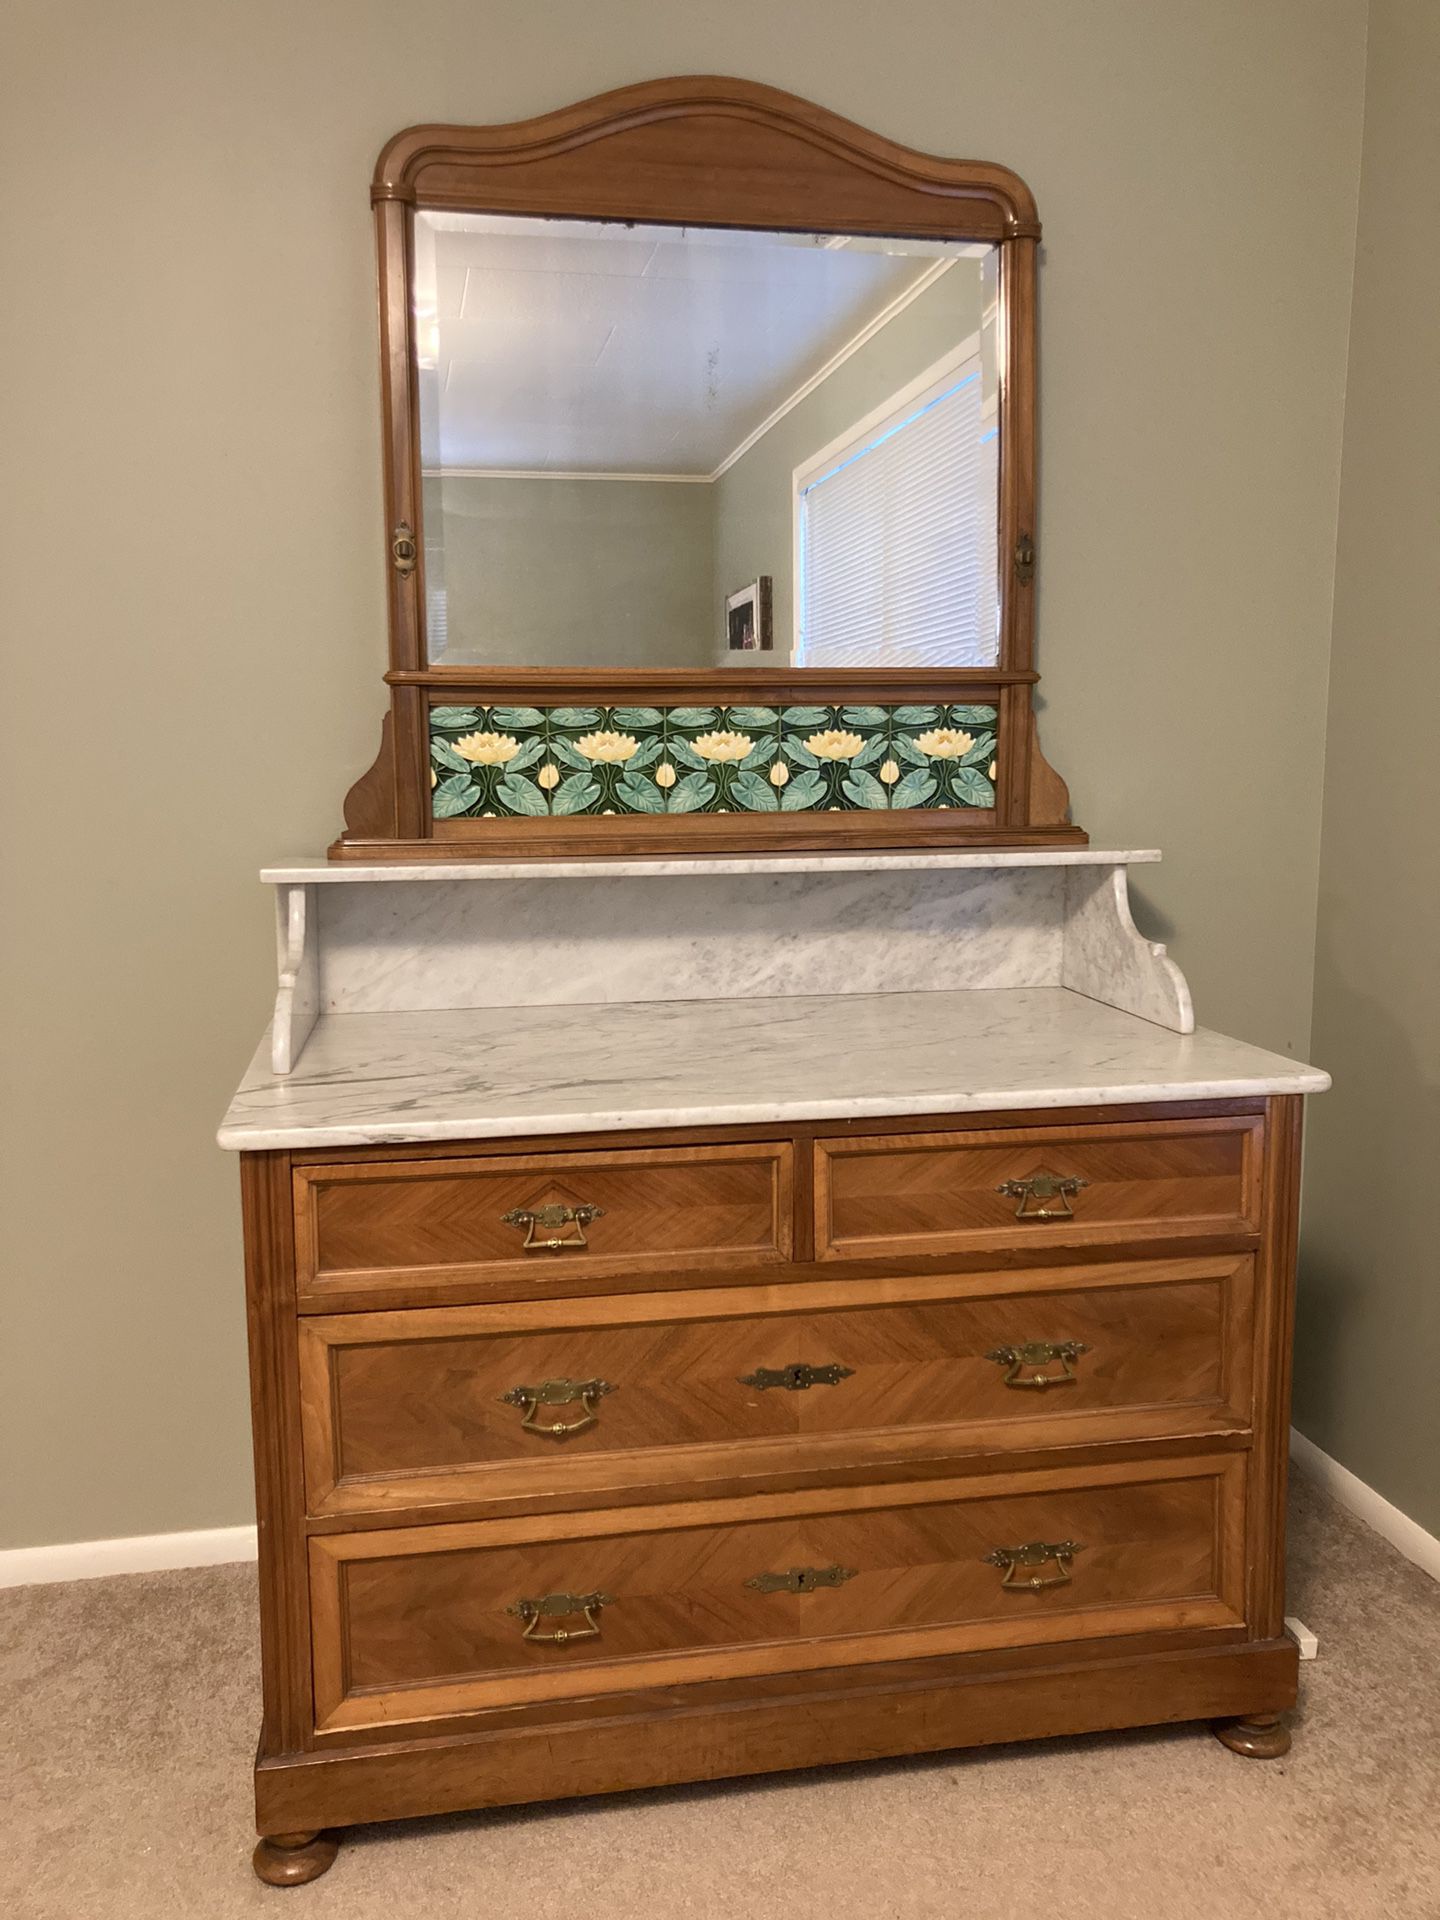 Marble-topped Antique Dresser With Tile-Decorated Mirror